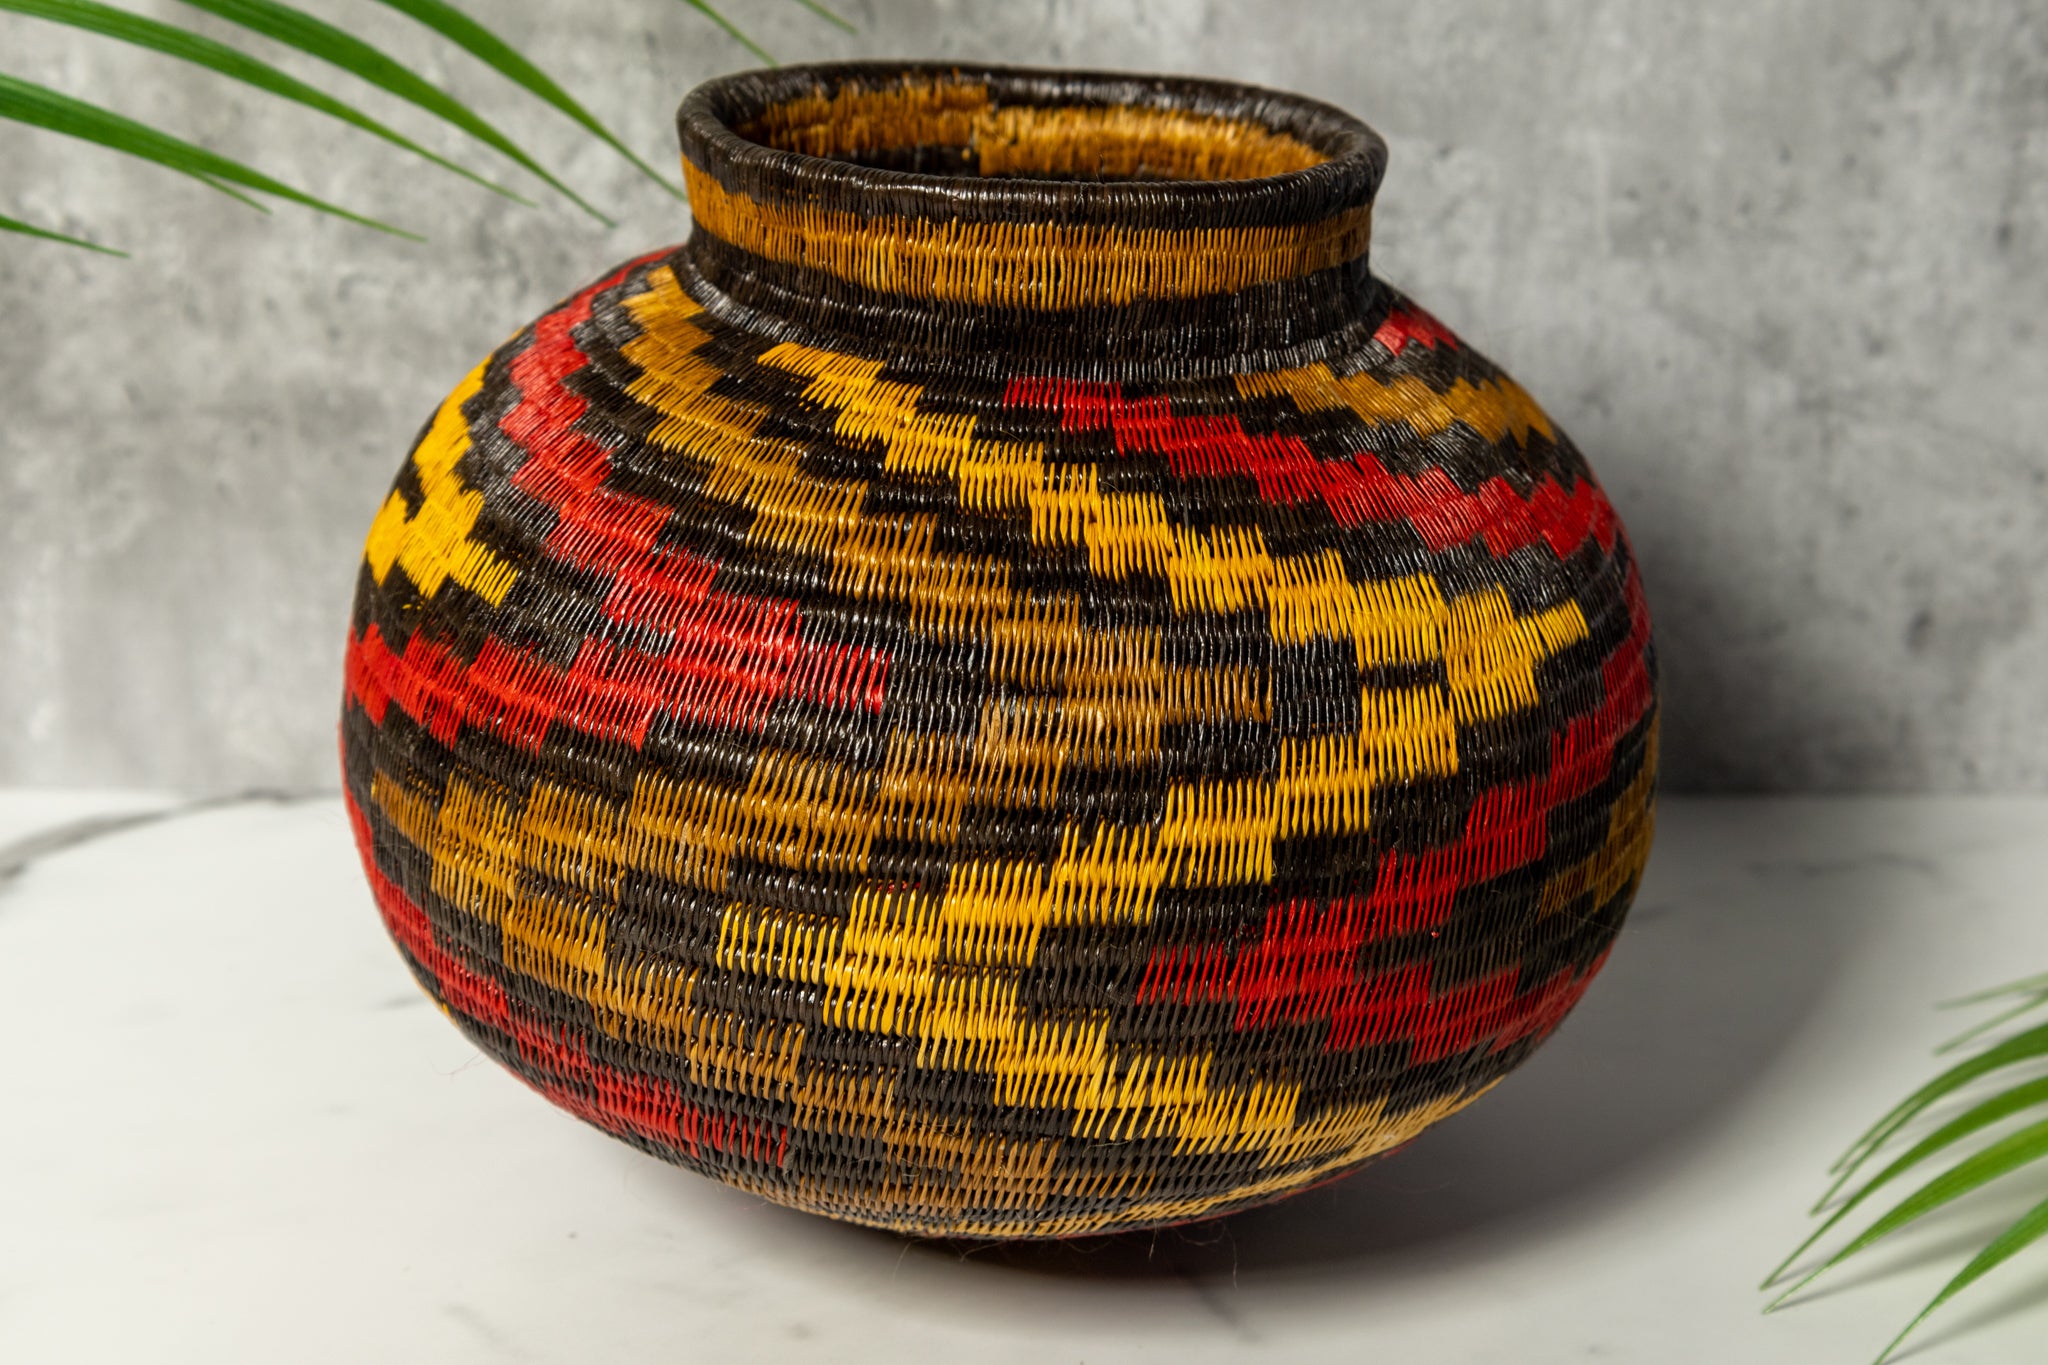 ZigZag Flames Of Fire Woven Basket